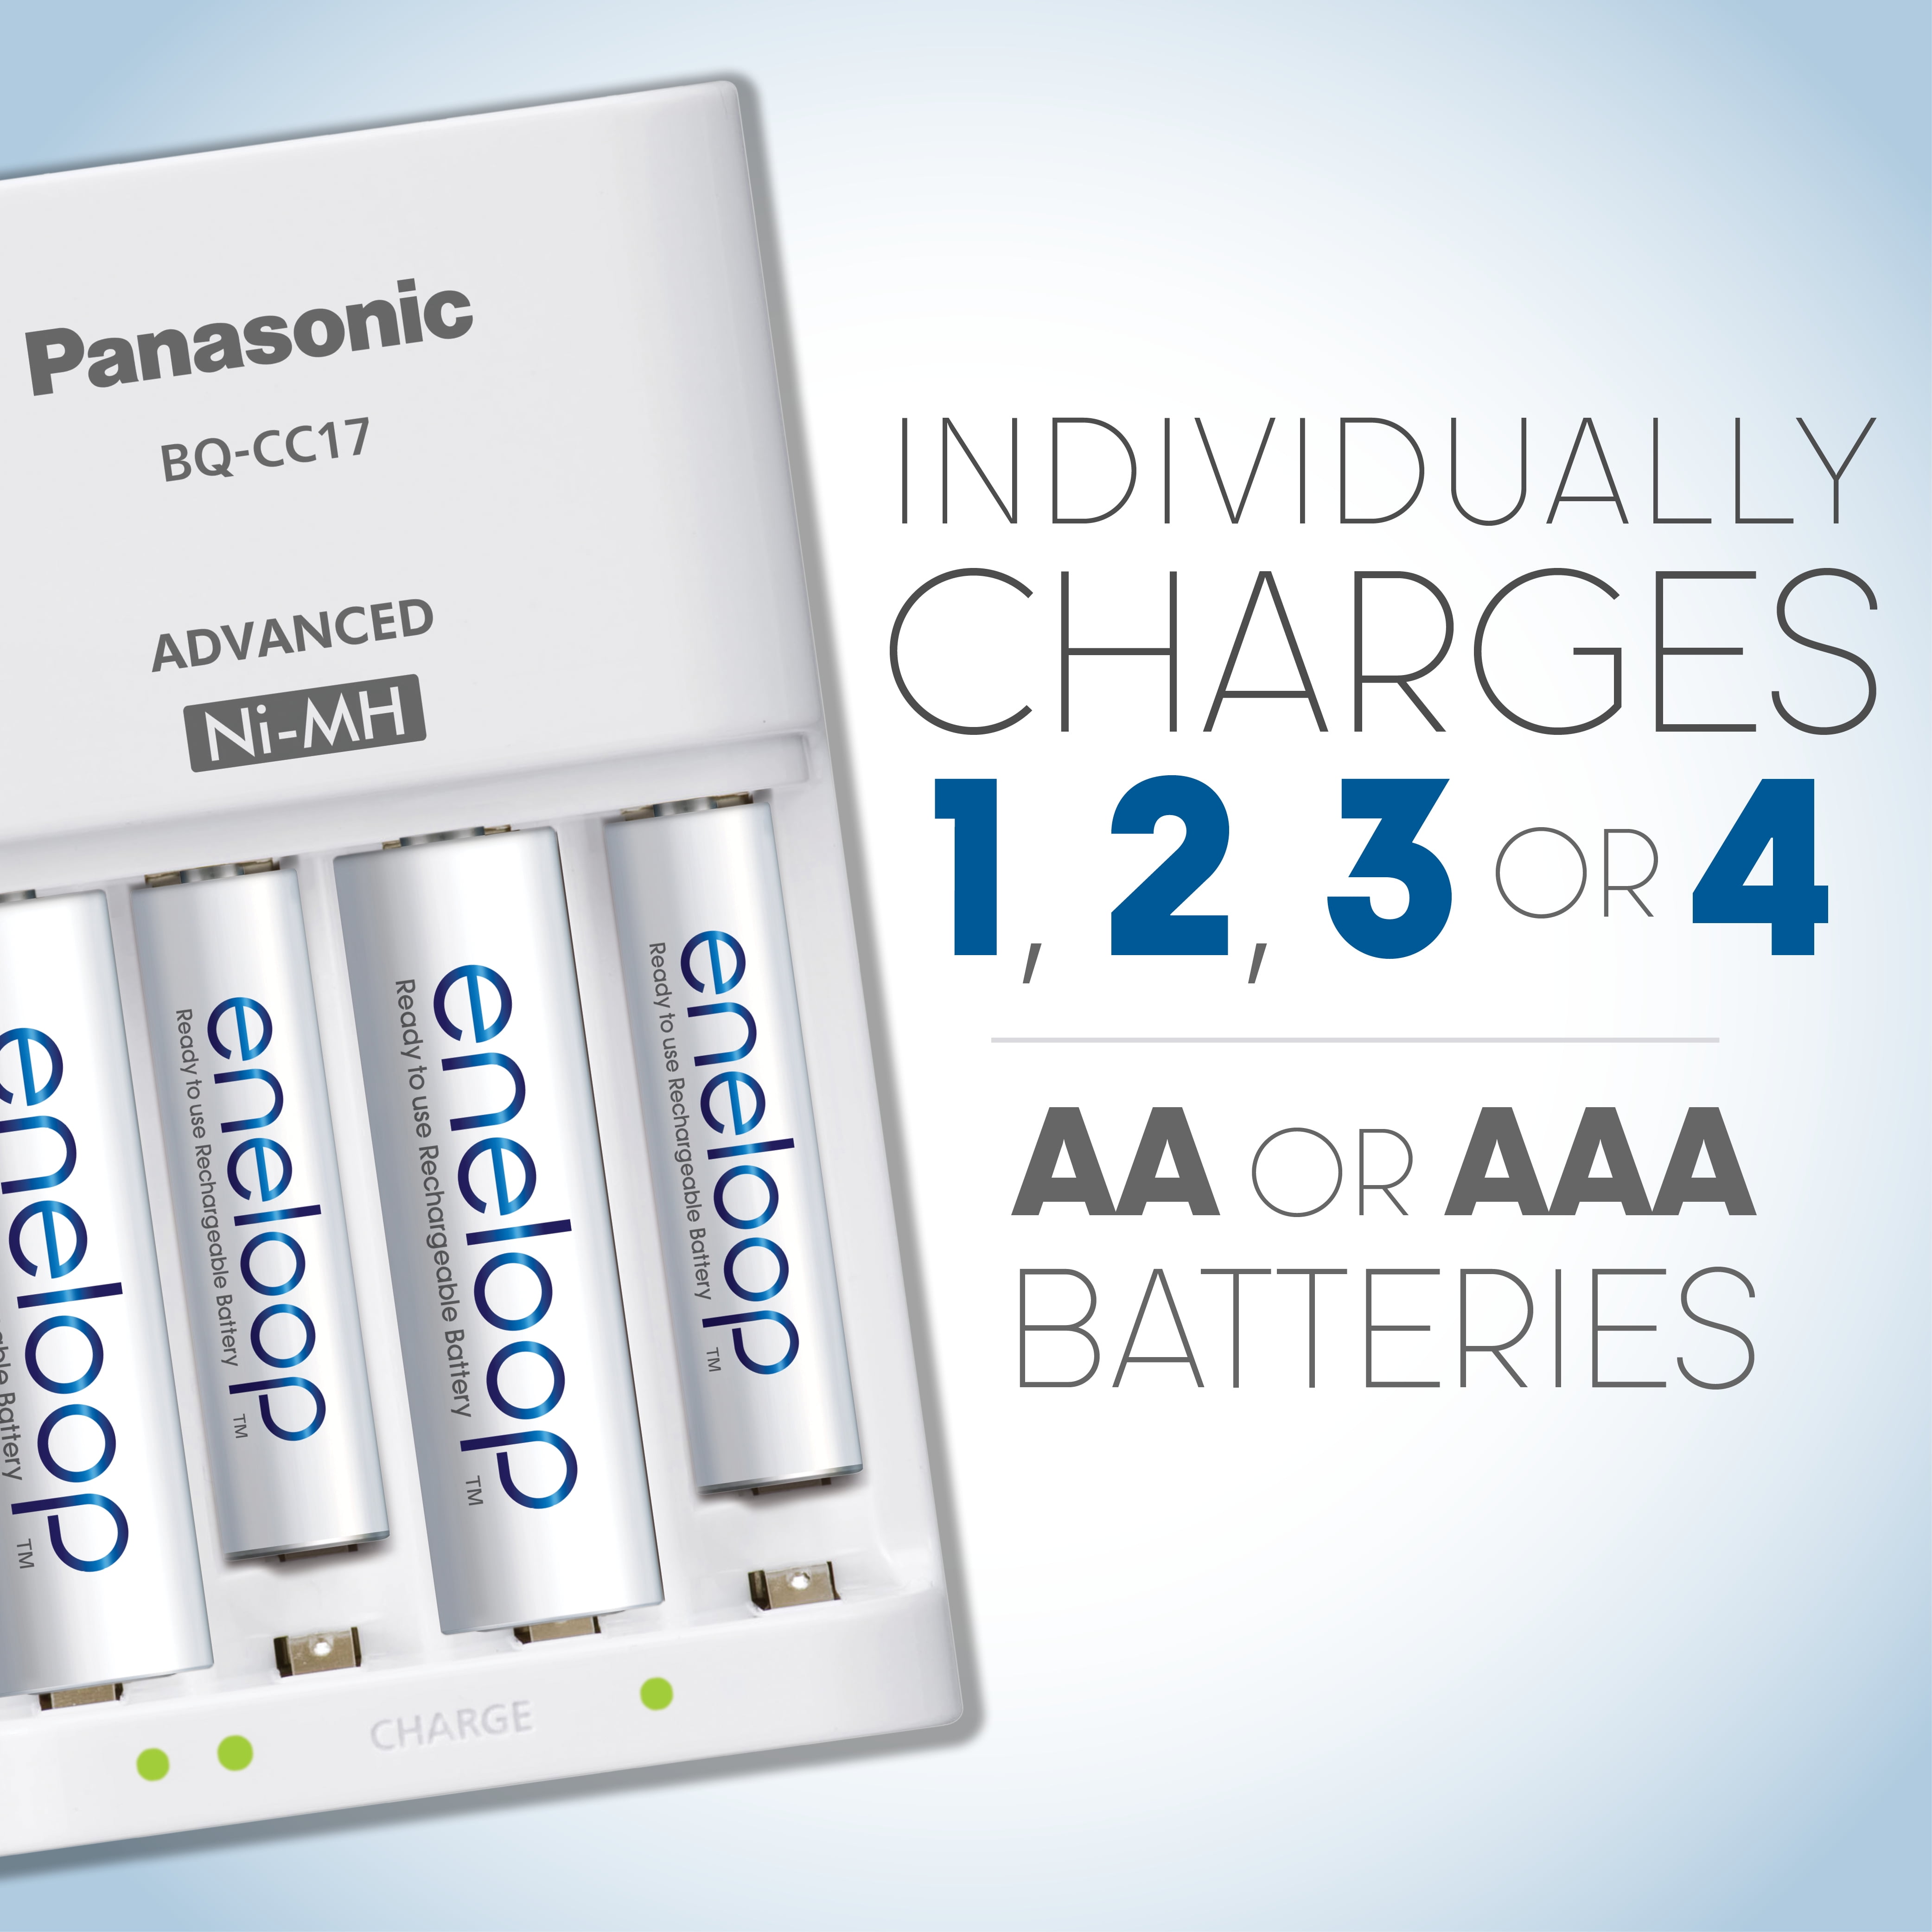 Panasonic Eneloop K-KJ17MCC82A Power Pack; 8 AA & 2 AAA Nickel Metal  Hydride Rechargeable Batteries, CC17 Charger, 2 C & 2 D Battery Adapters,  and Storage Case 